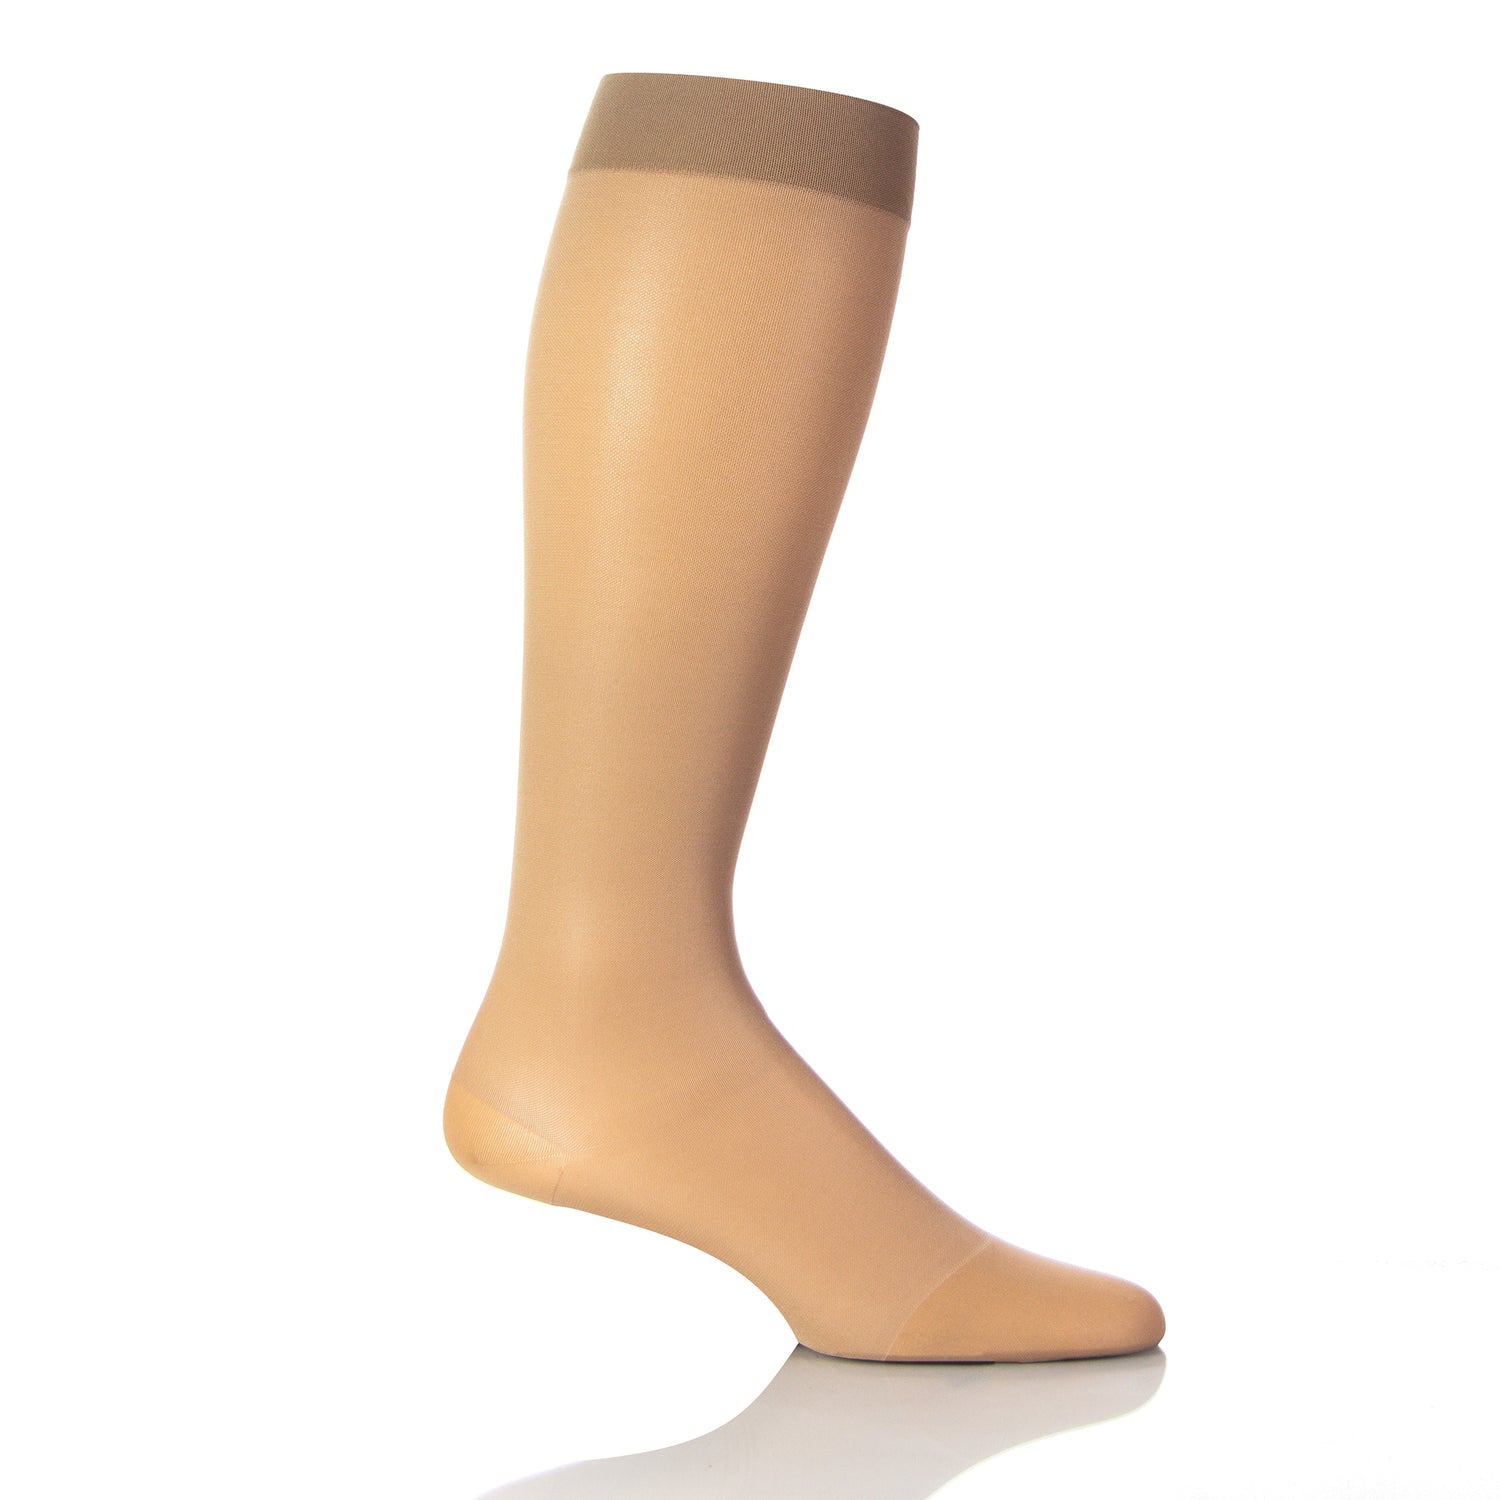 Compression Stockings Strength20-30mmhg Compression Thigh High Stockings  For Women - Varicose Vein Support